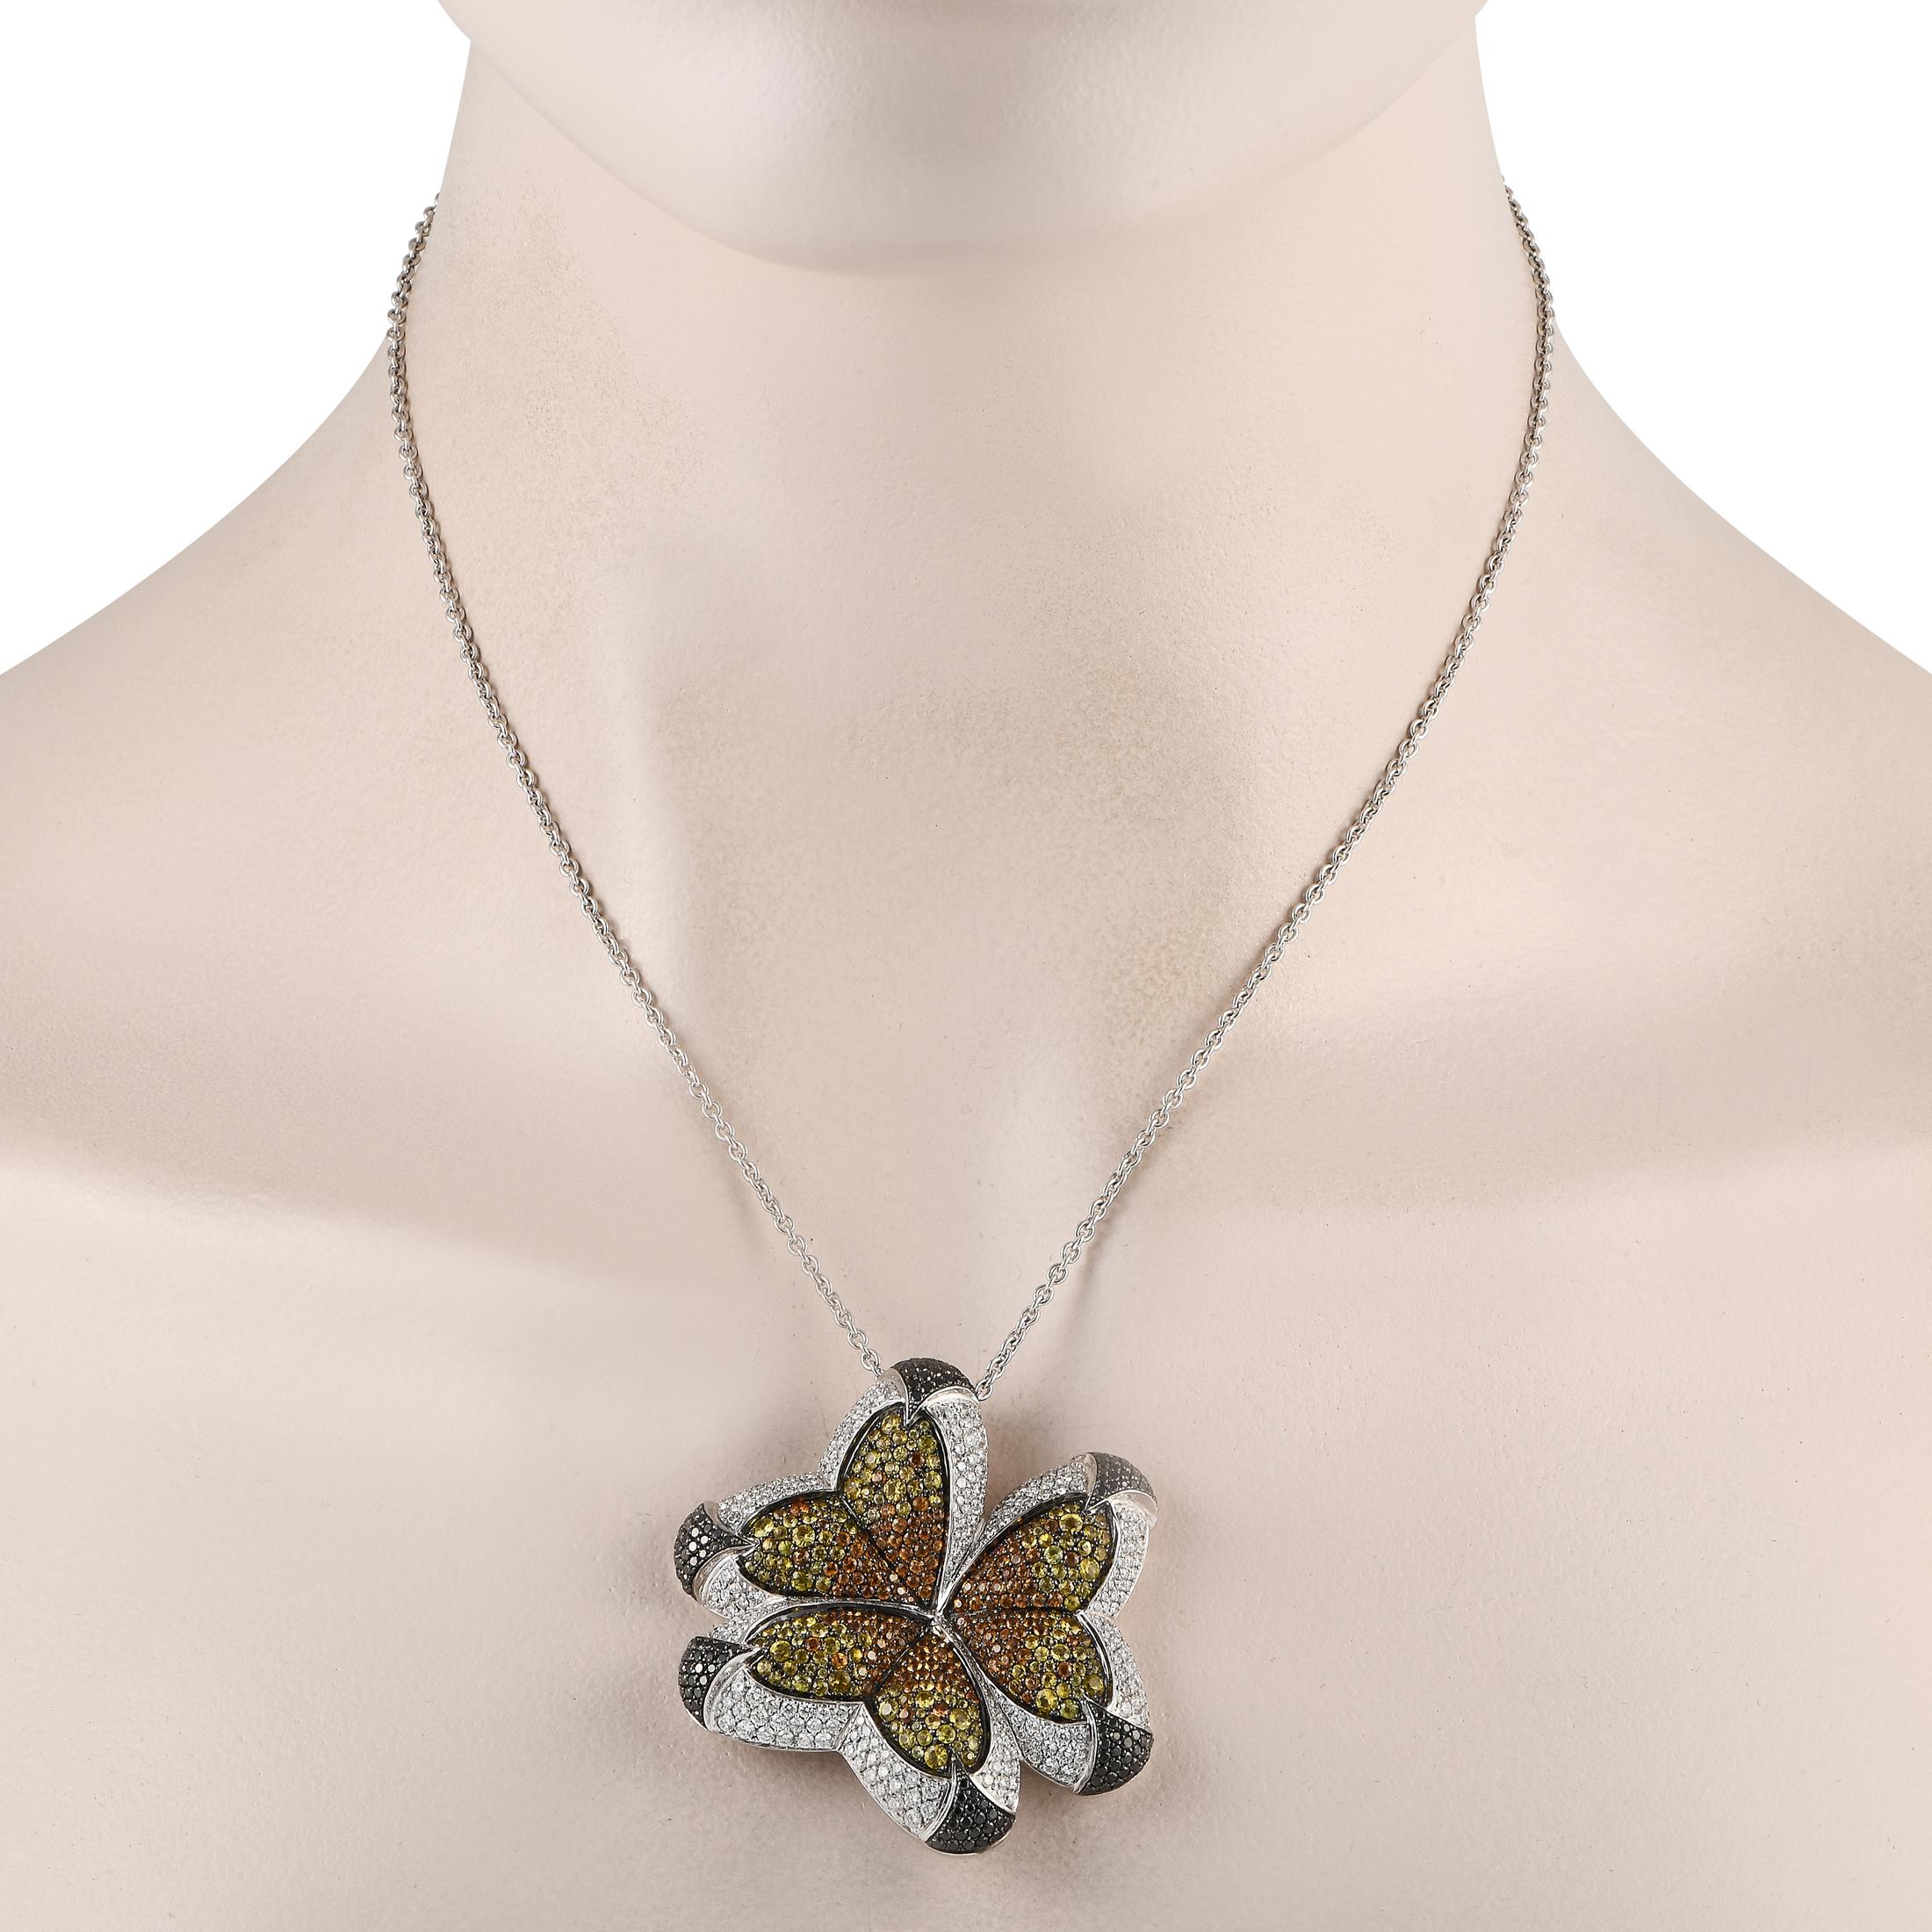 A cluster of butterflies boast the splendor of their glorious wings through multi-colored stones. 2.50ct white diamonds with compliments of 1.31ct black diamonds provide an intricate framework to the spread of 4.97ct multi-colored sapphires.